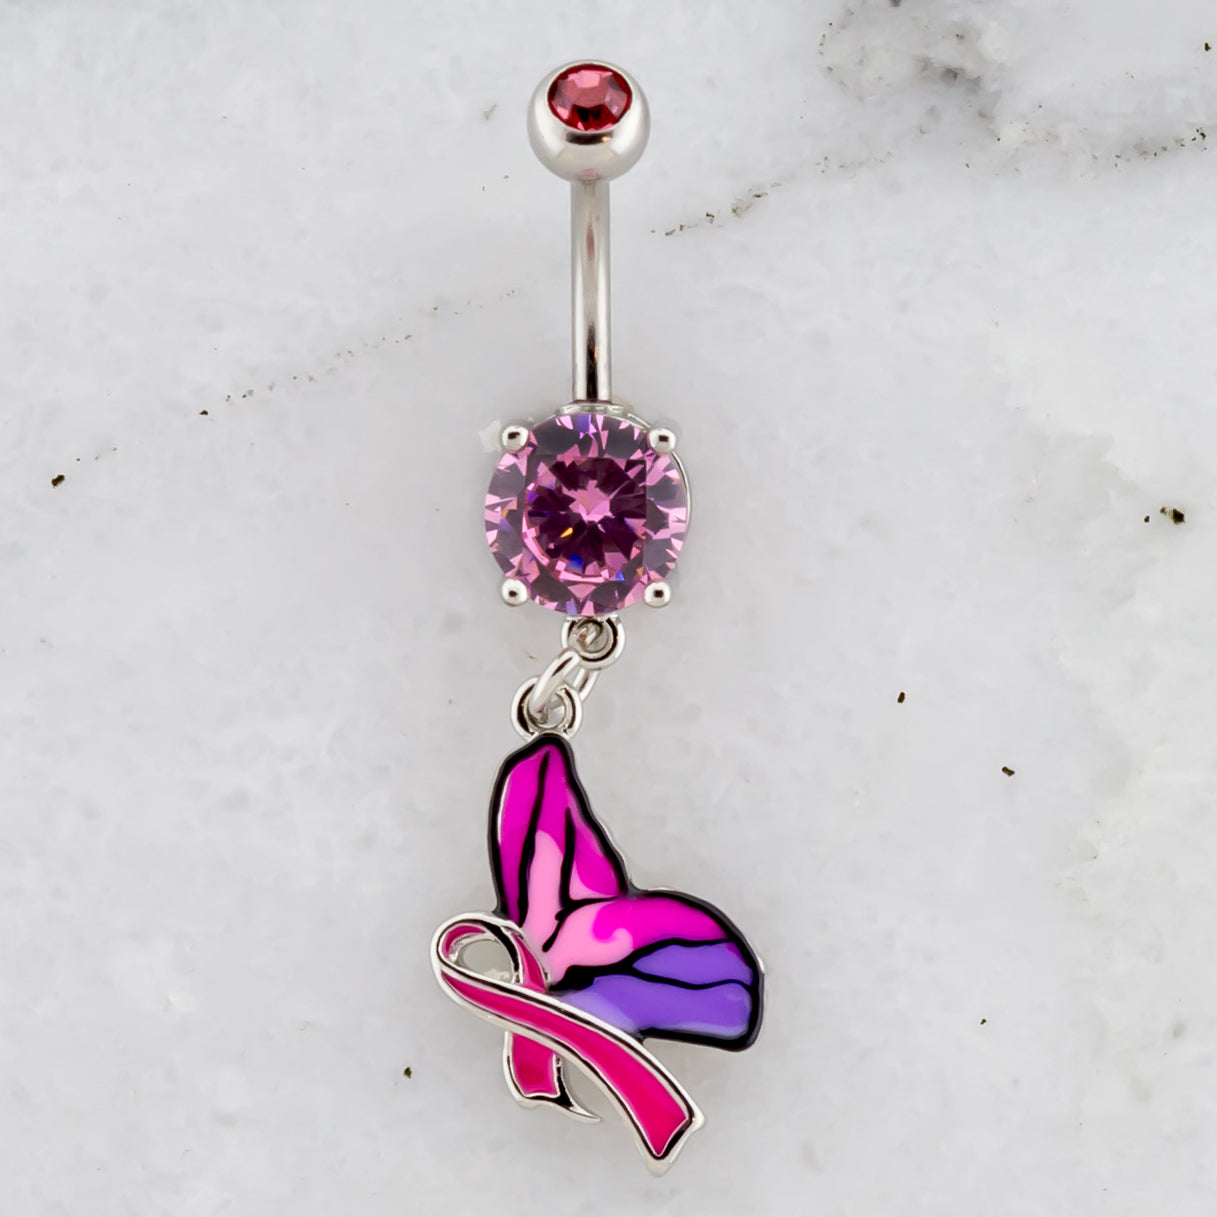 14G Breast Cancer Awareness Butterfly with Ribbon Navel Ring - Pierced Addiction